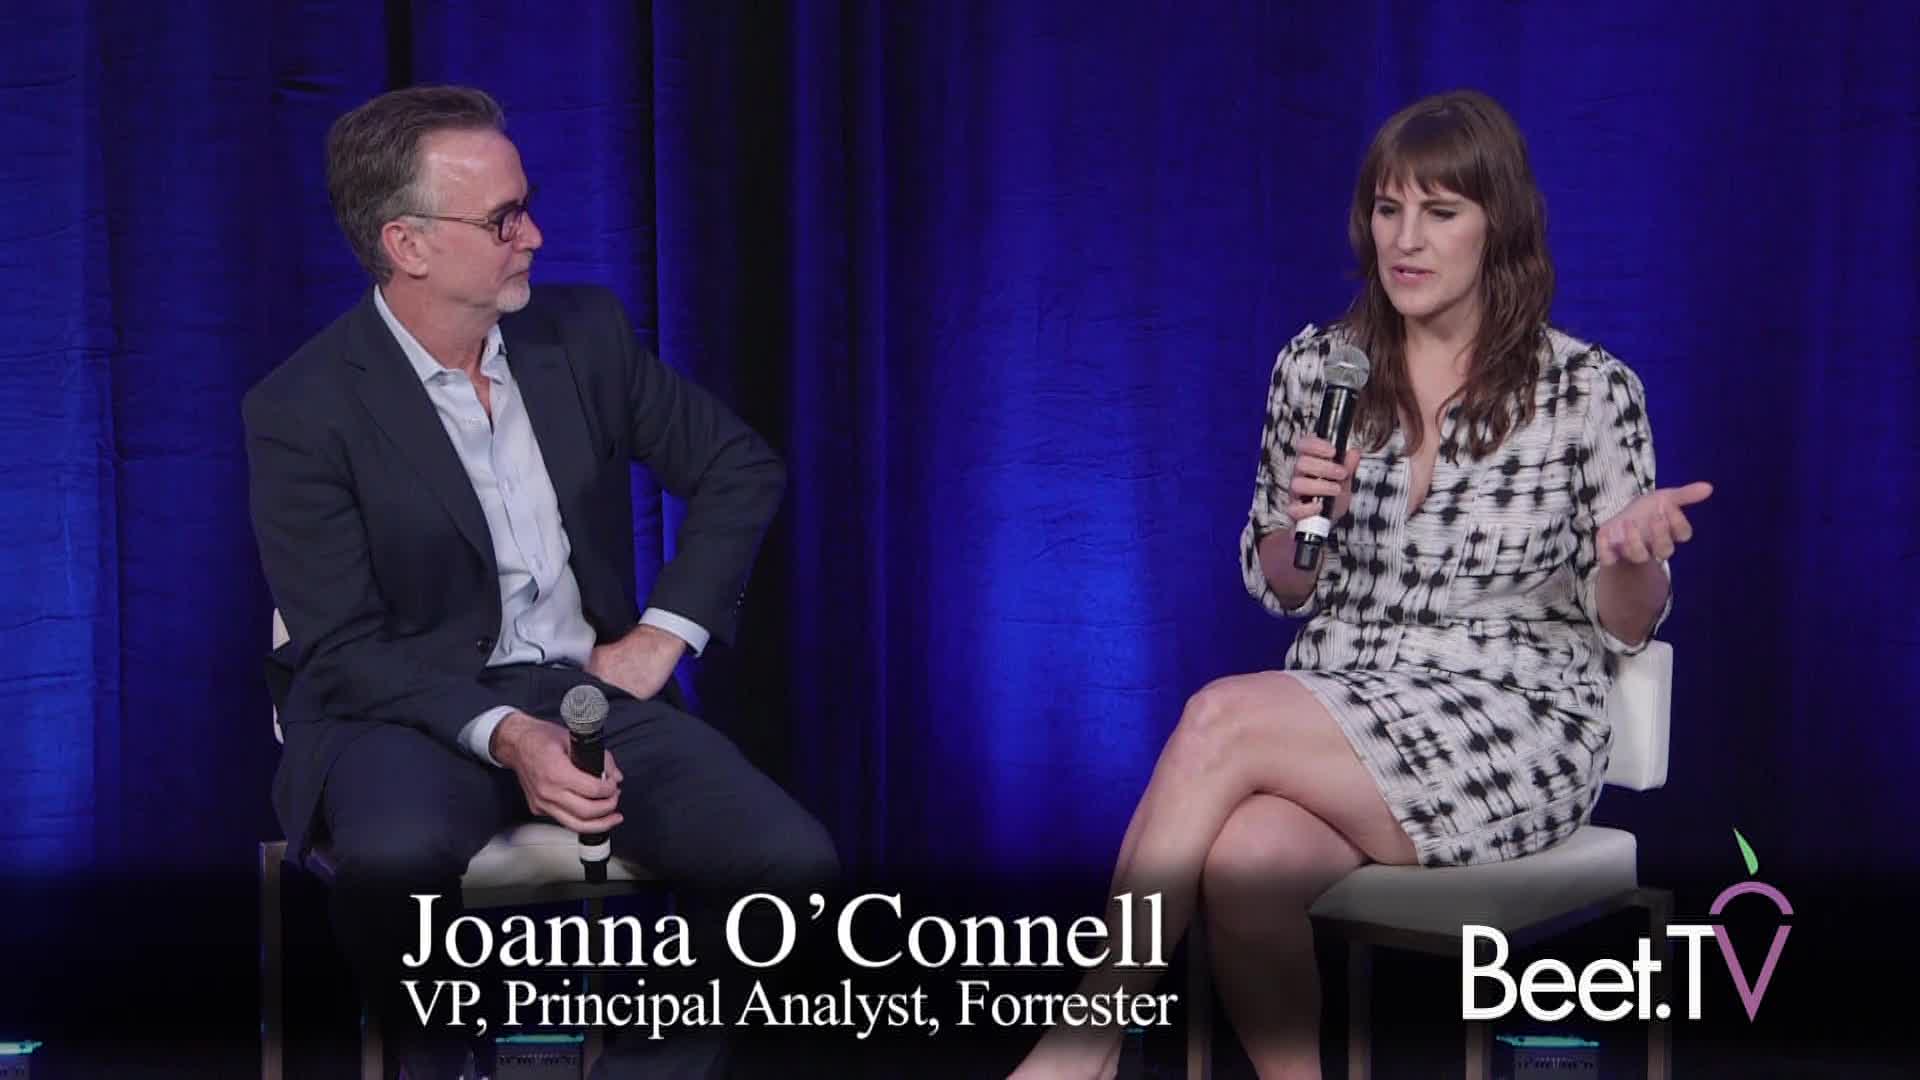 O’Connell Of Forrester Explores The Consumer-Marketer Divide